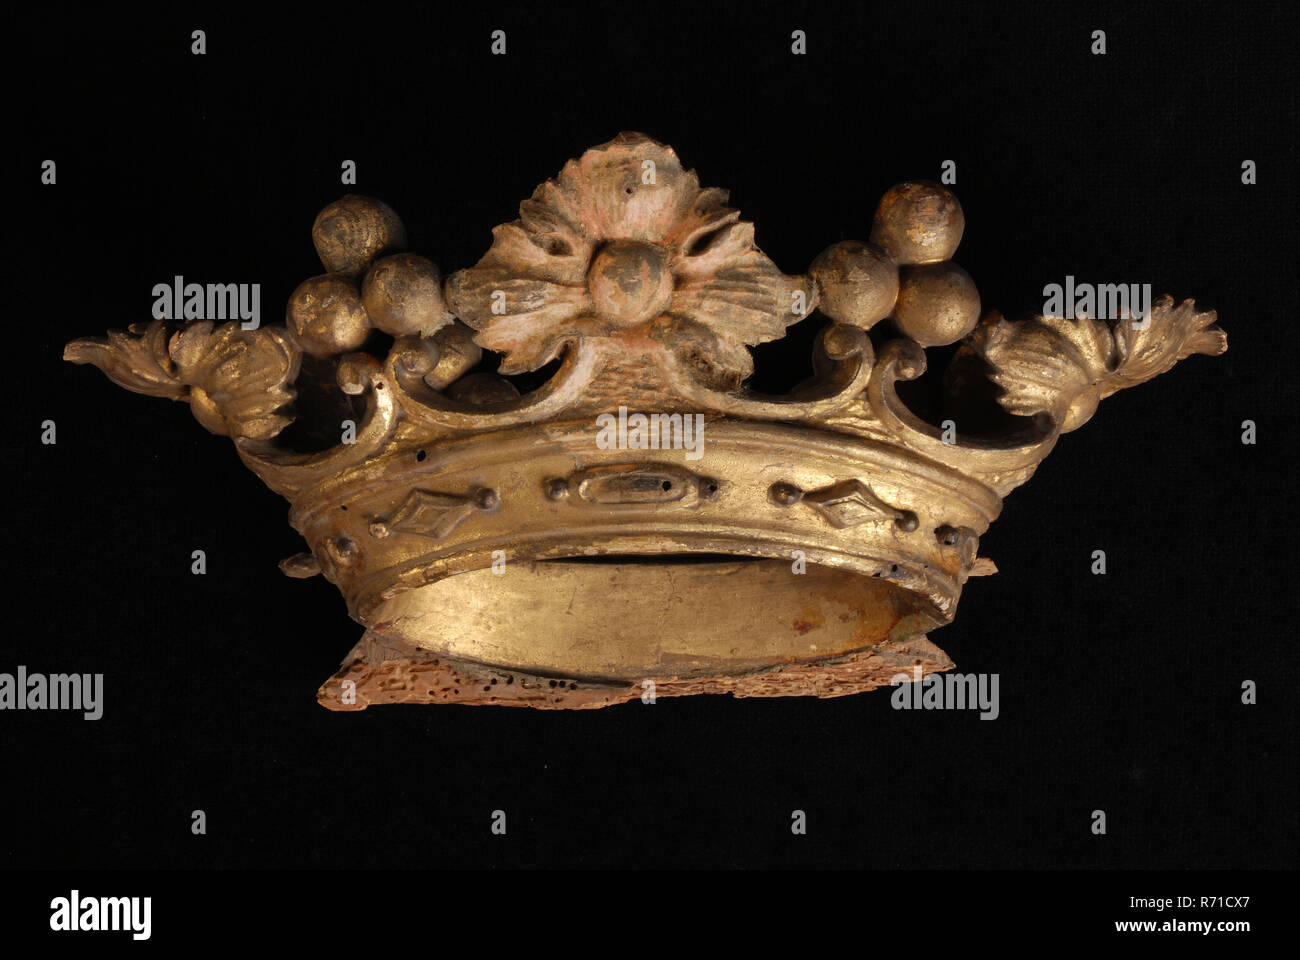 Carved wooden gilded crown, broken off from coat of arms, fragment woodcarving sculpture footage wood gold, heraldry regent Rotterdam City Center Stadsdriehoek Hoogstraat Gasthuis Rotterdam. Stock Photo